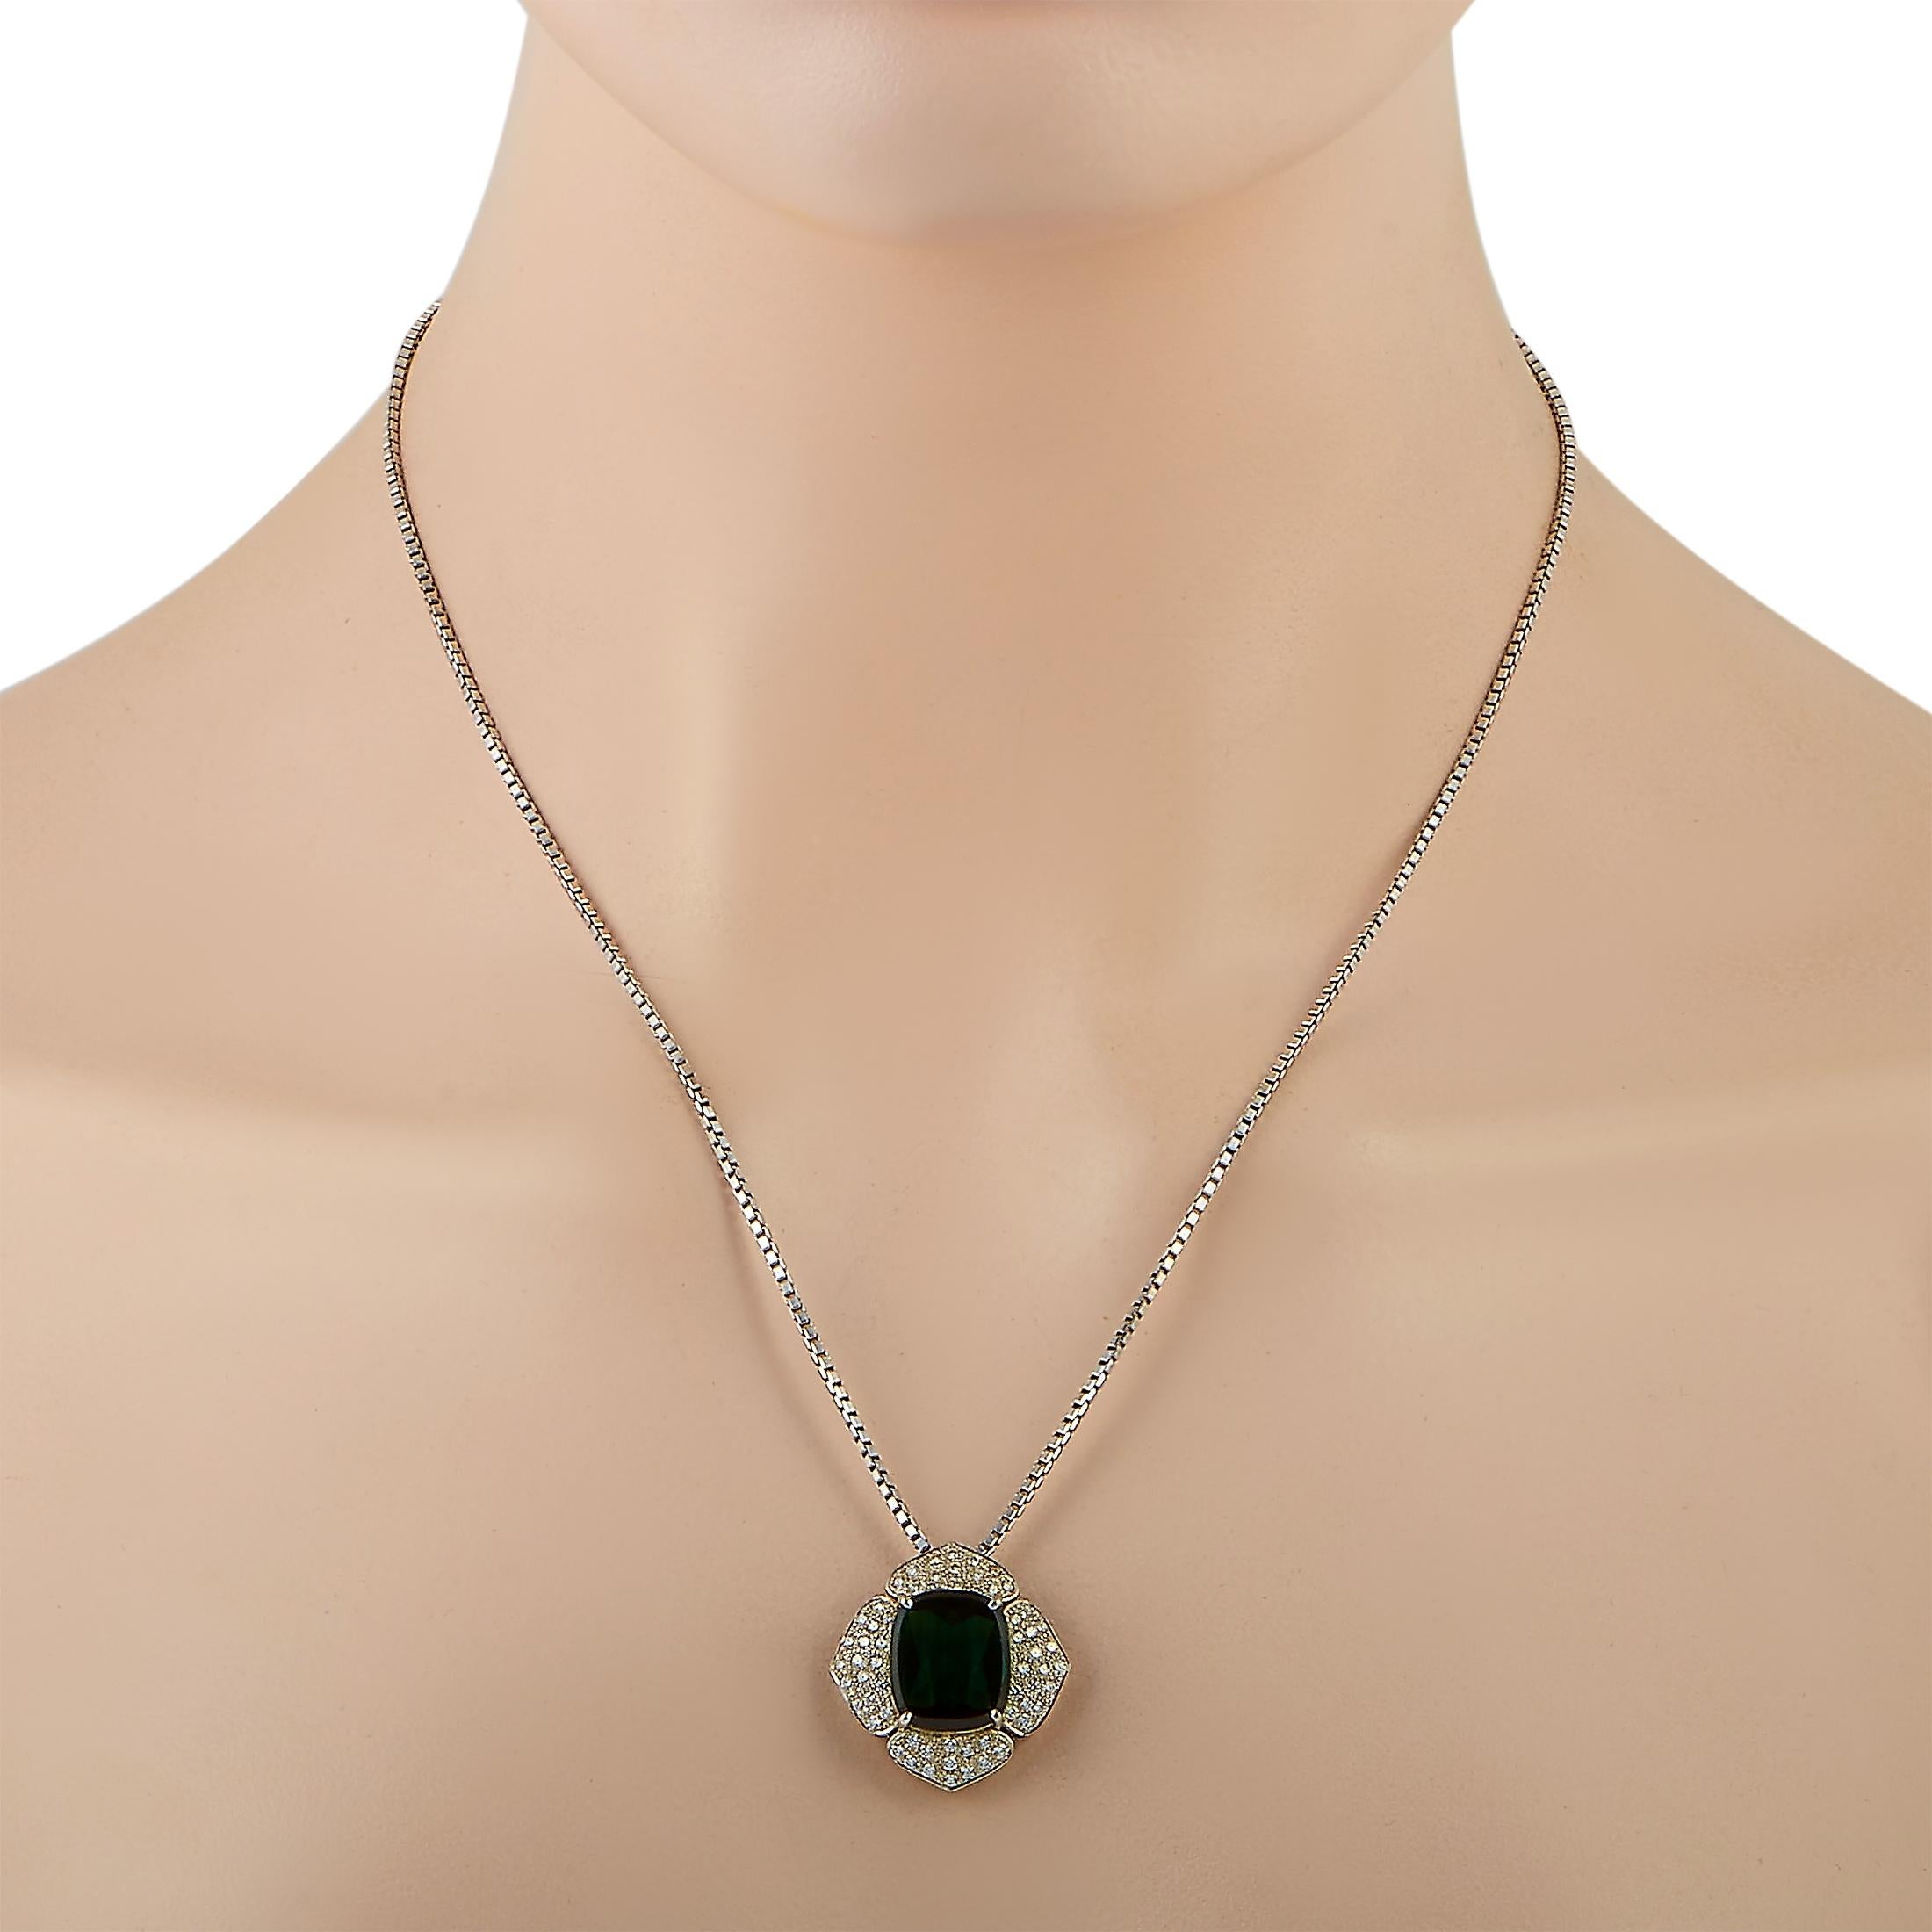 This LB Exclusive necklace is crafted from platinum and weighs 20.6 grams. It is presented with a 19” chain and a pendant that measures 1” in length and 1” in width. The necklace is set with a 7.89 ct tourmaline and a total of 0.74 carats of